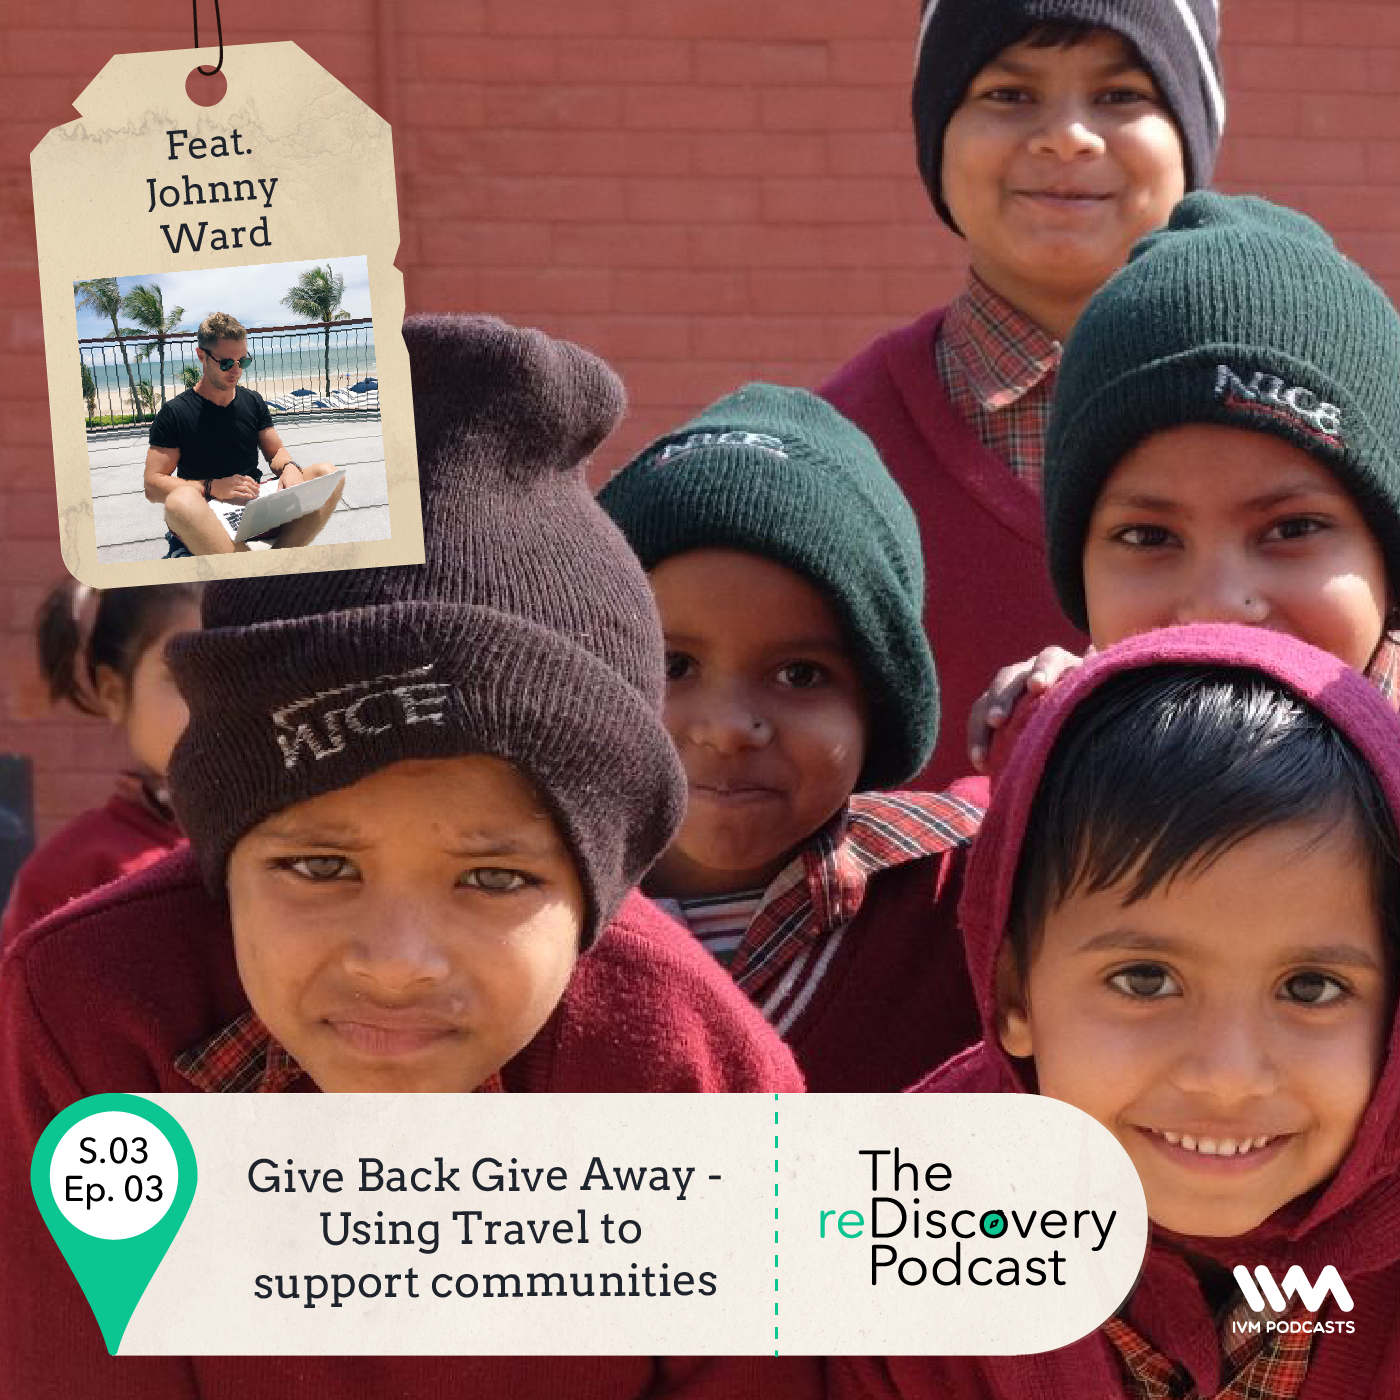 S03 E03: Give Back Give Away - Using Travel to support communities